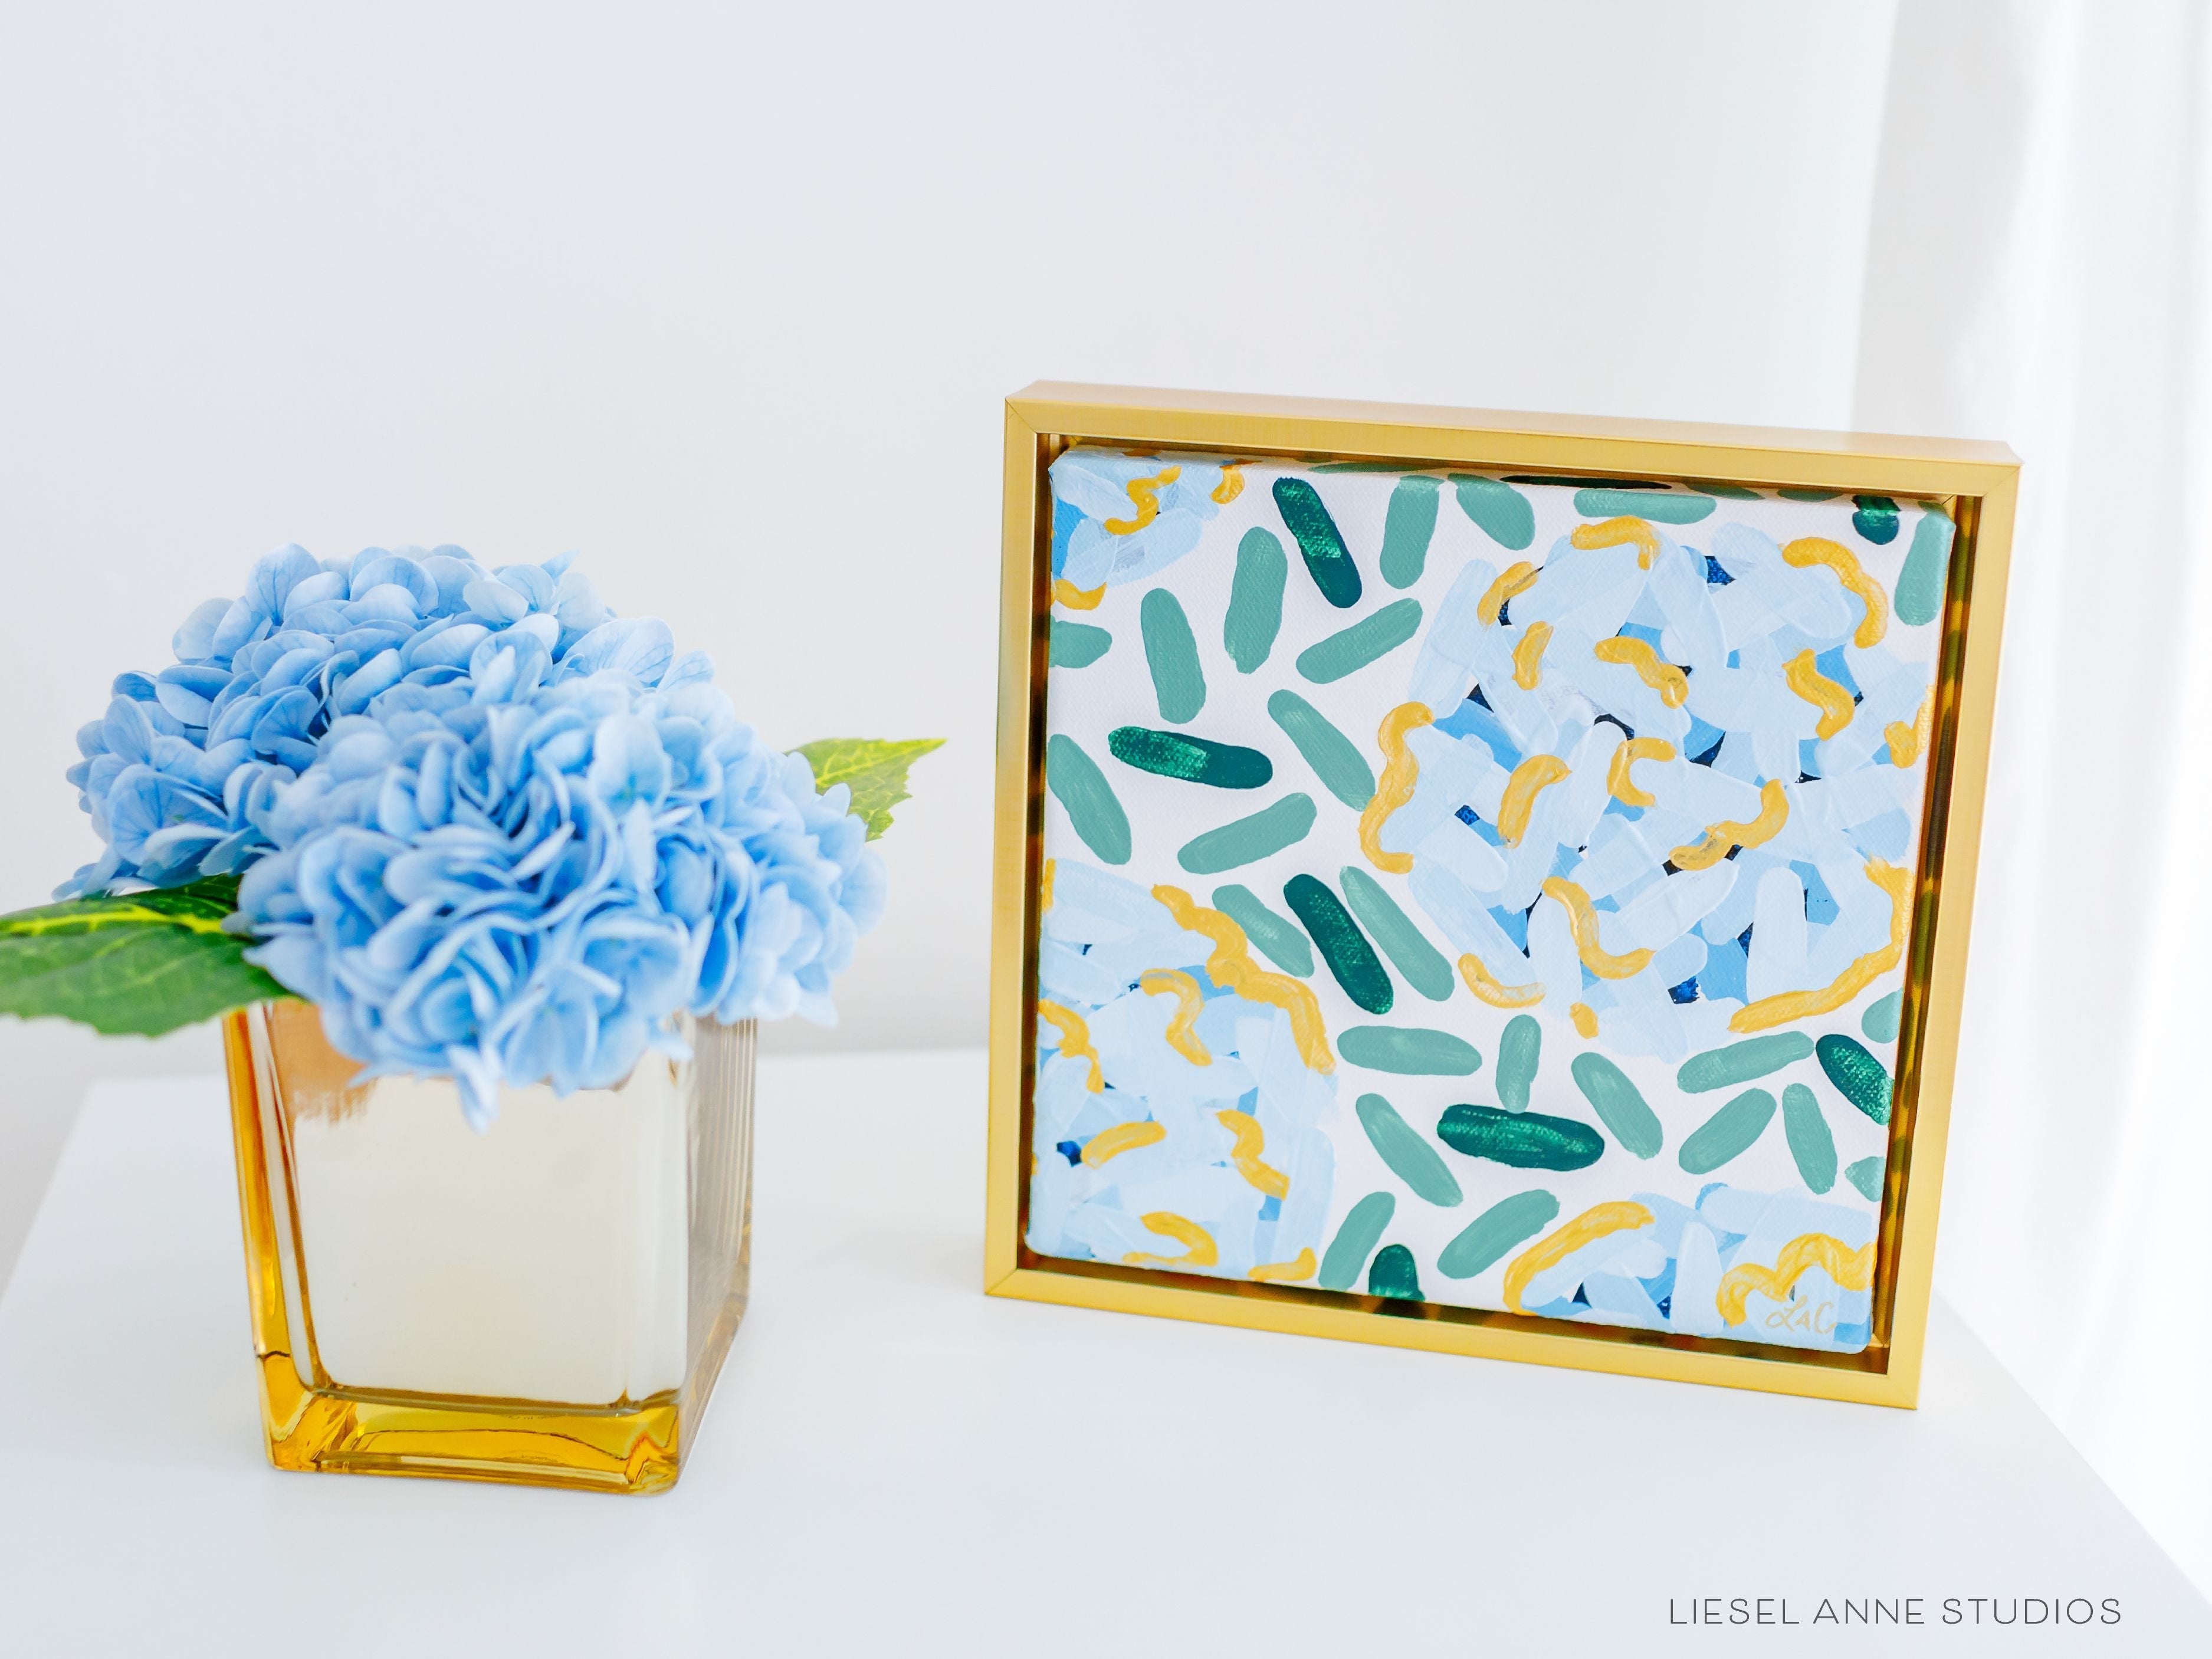 Golden Hydrangea | White & Blue XXVI-Original artwork measures 5"x5" | Framed in gold wood floater frame | Hand-Painted with gouache on stretched canvas | Features our signature Golden Hydrangea design with a white base, blue hydrangeas and shimmery gold accents | Initialed in gold by the Liesel Anne (the artist) on the front and signed and dated on the back-The Singing Little Bird